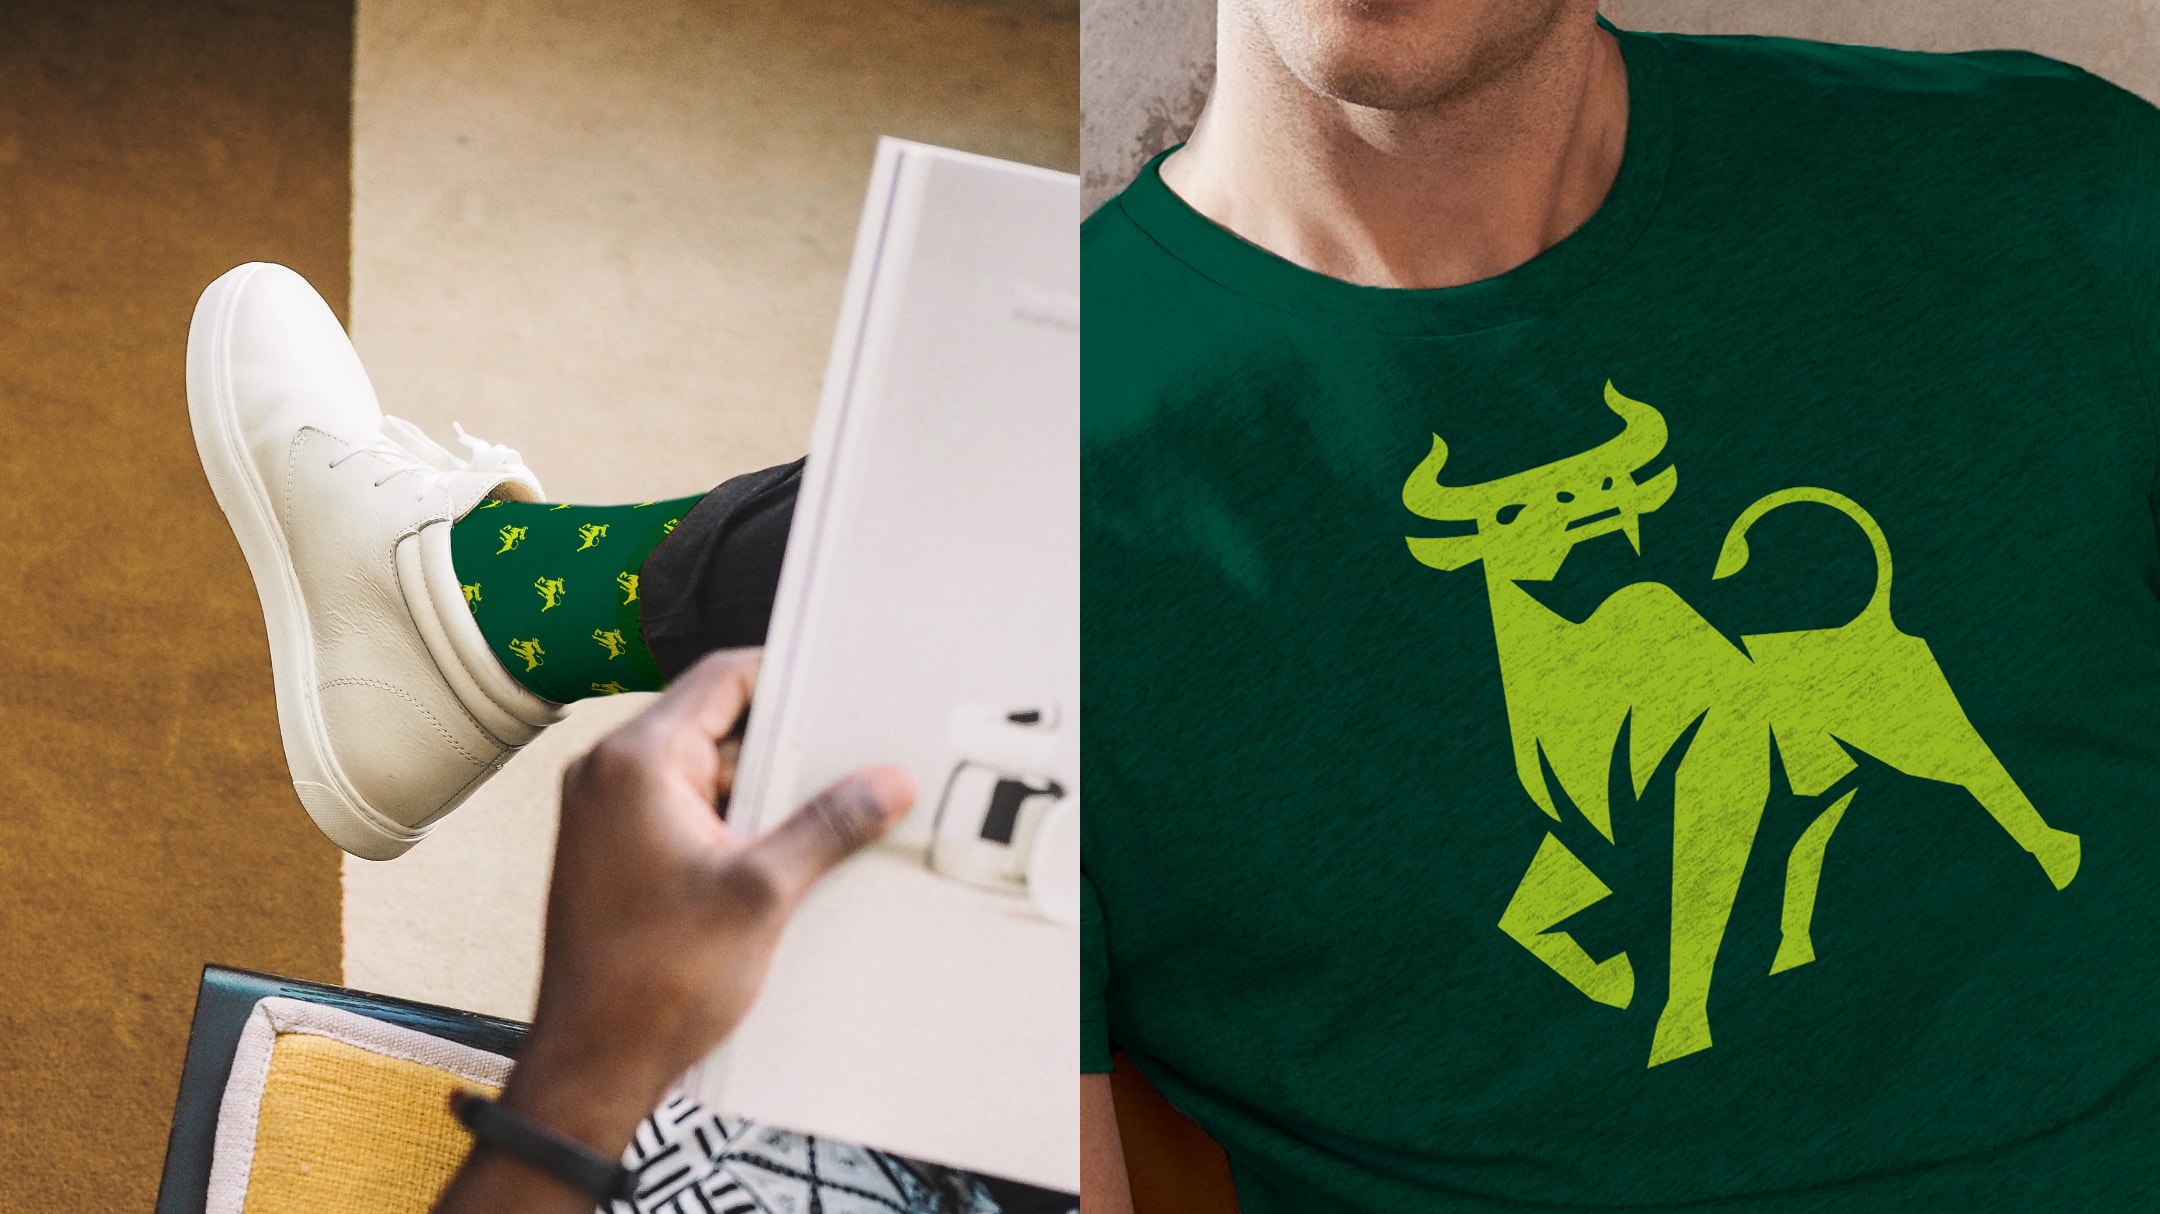 Examples of how USF's new academic logo can be applied to apparel